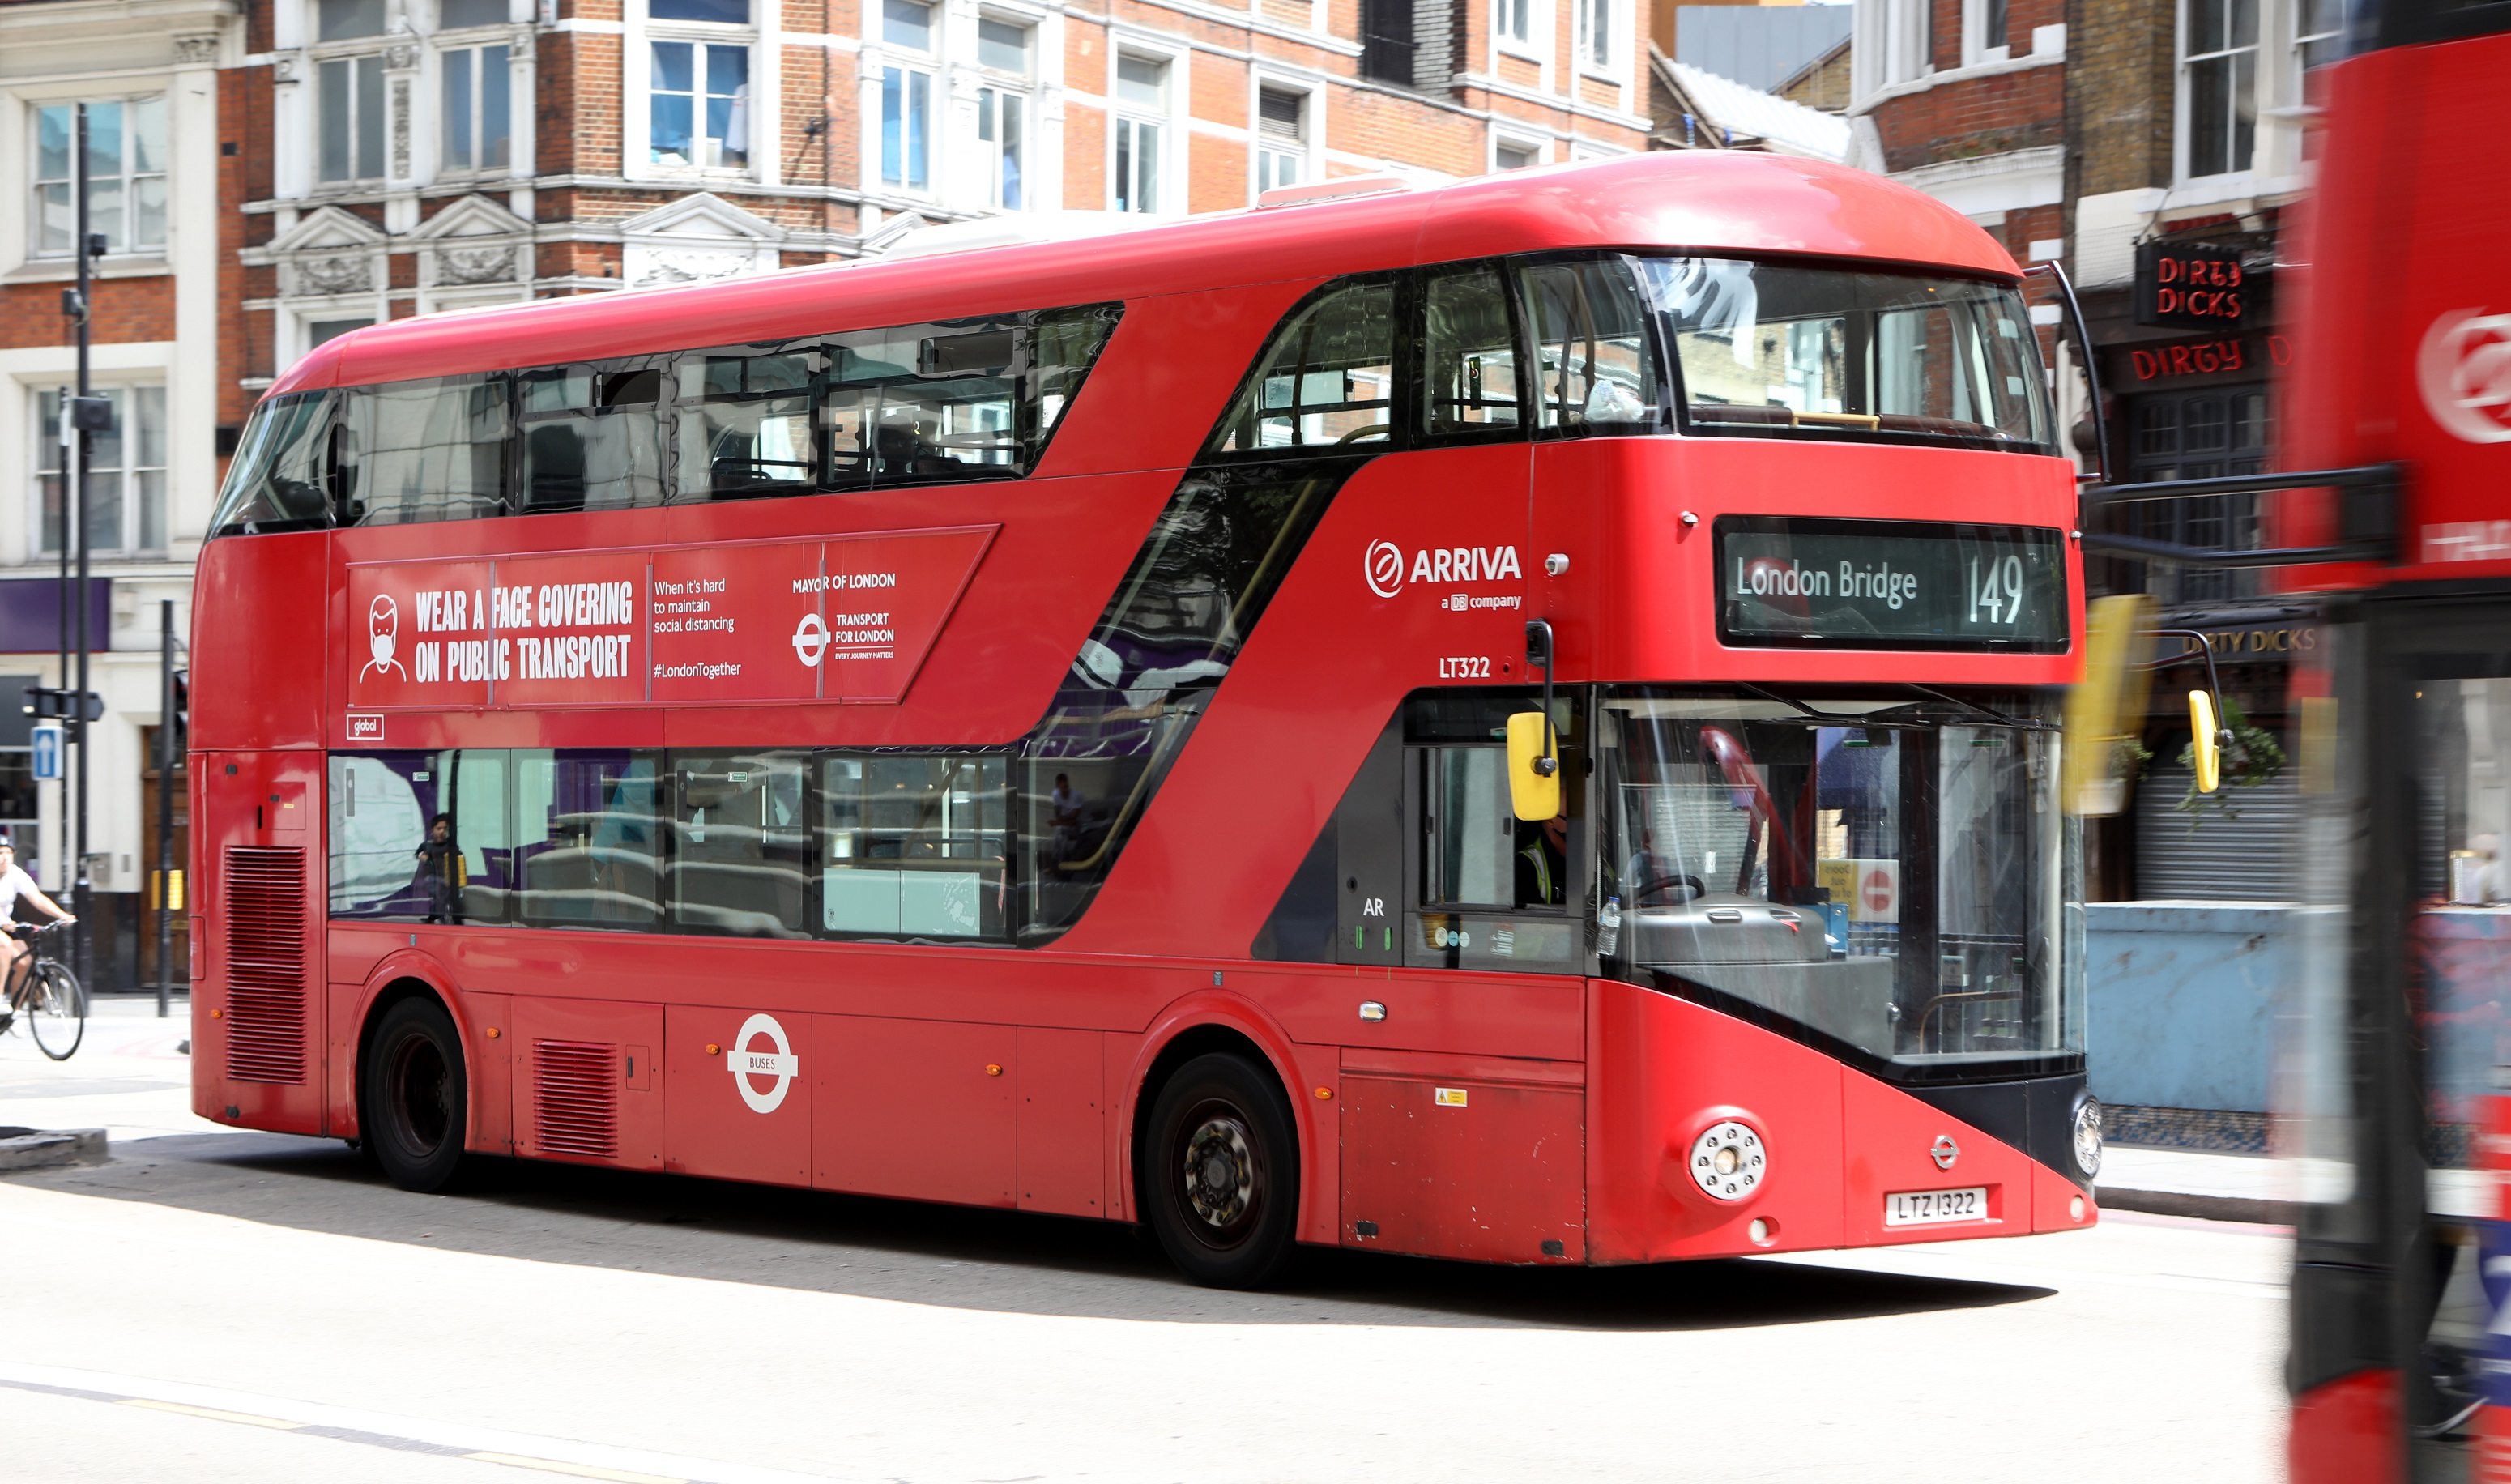 INIT onboard computer to go on all London buses